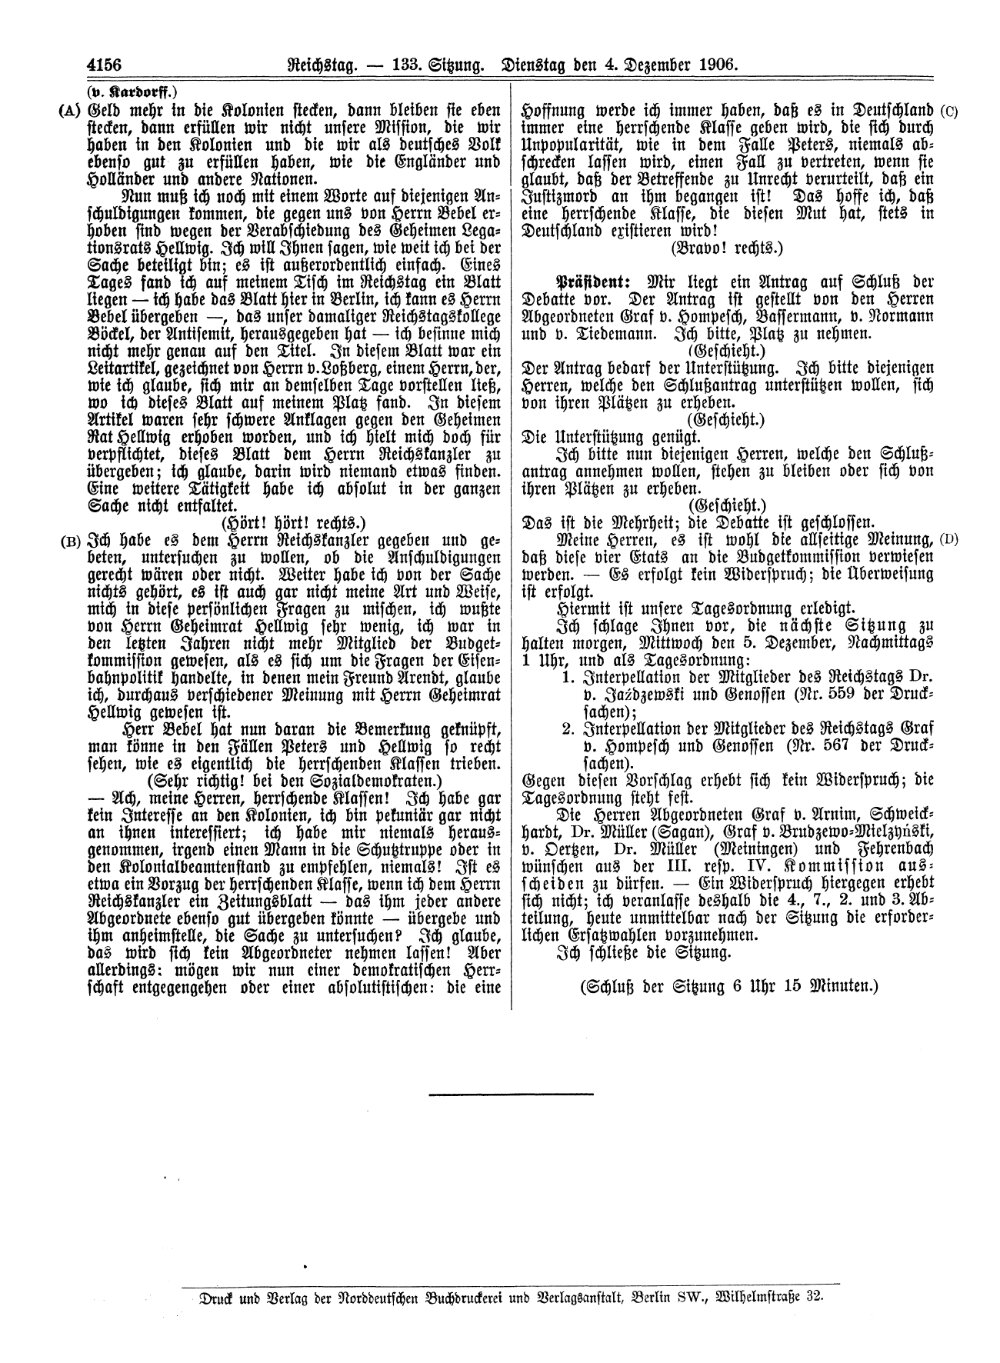 Scan of page 4156